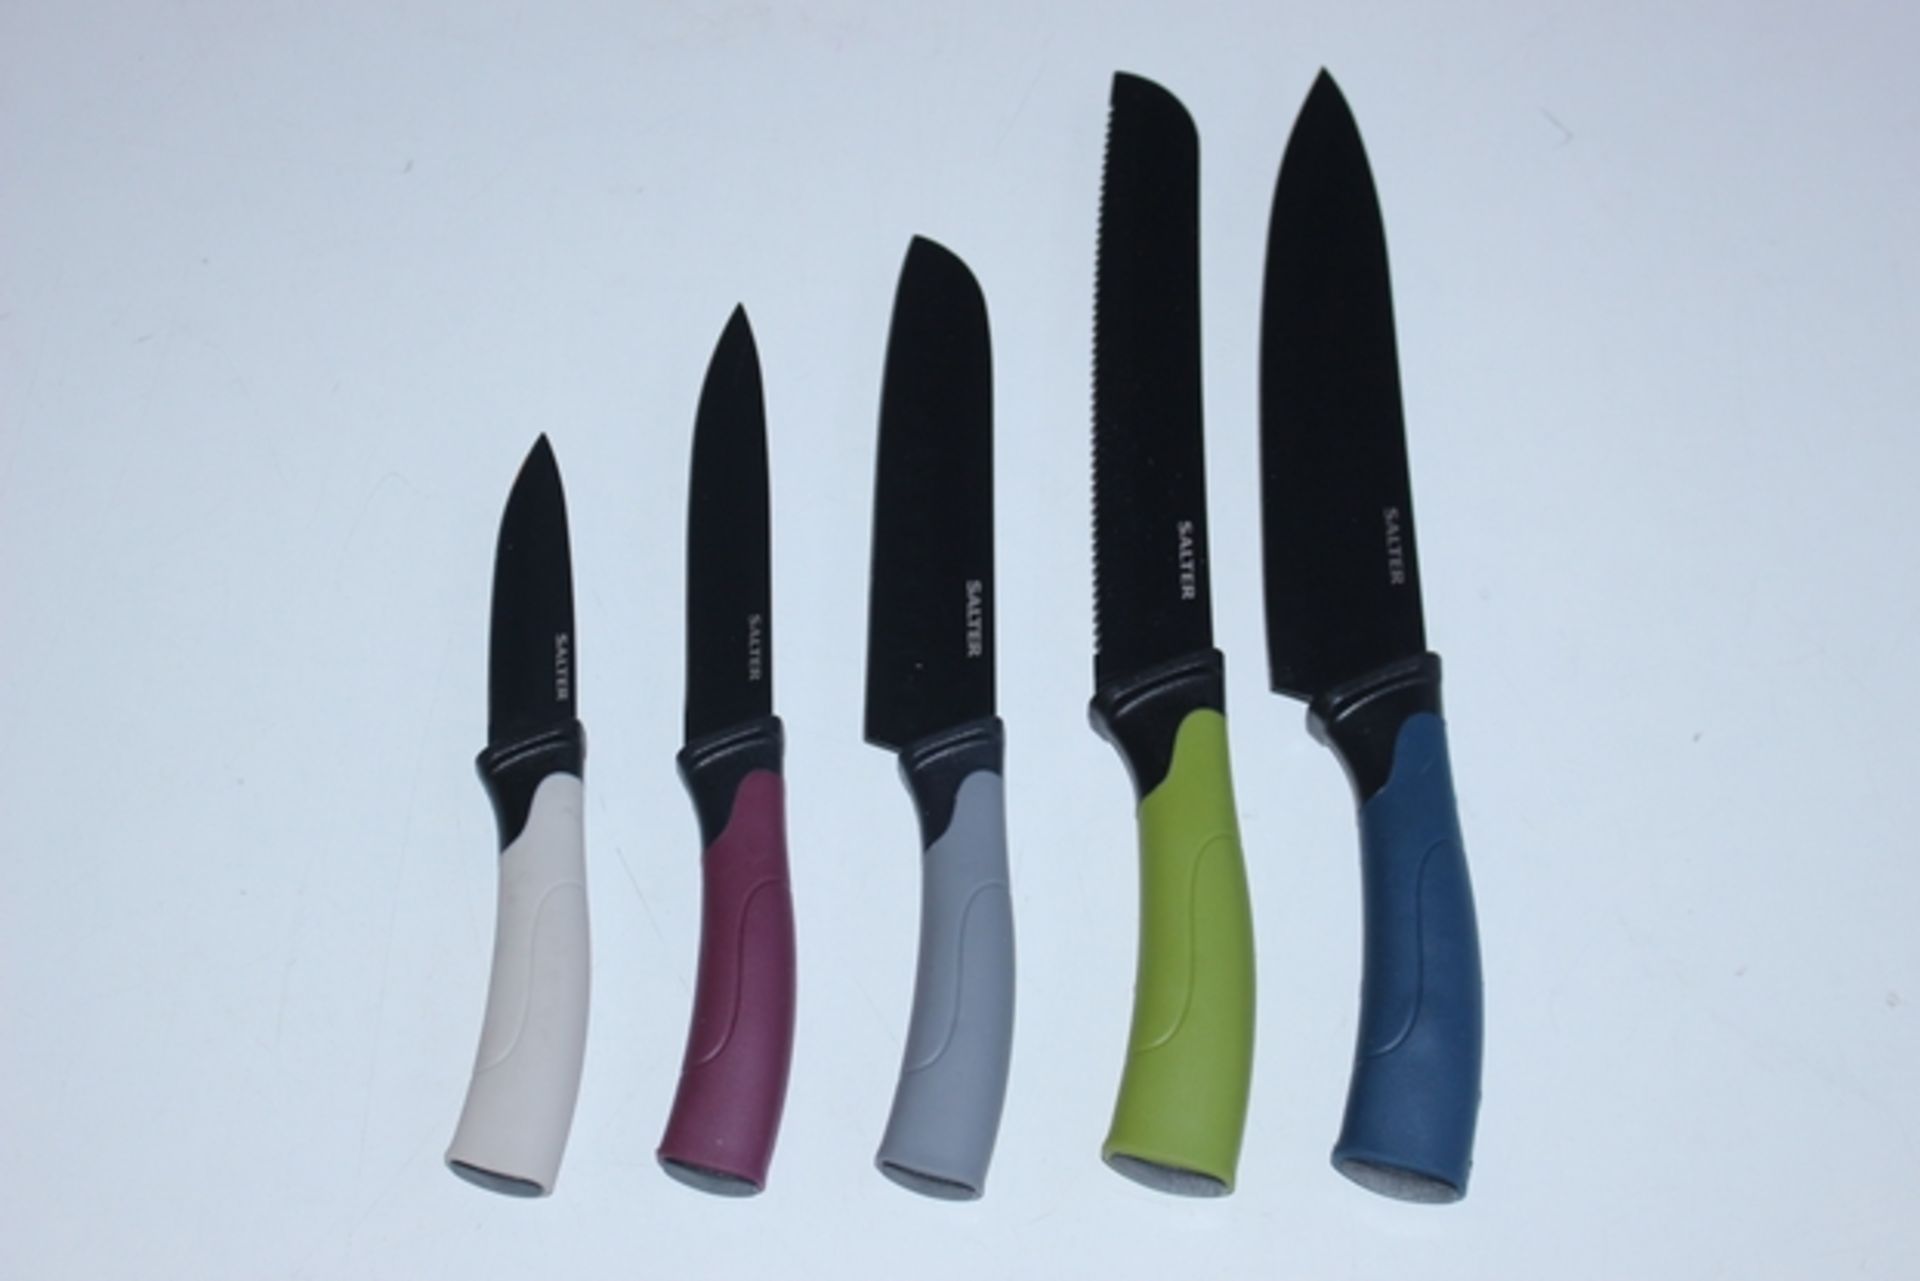 1X LOT TO CONTAIN 2 UNUSED SETS OF 5 SALTER KNIVES (PV-TONY)